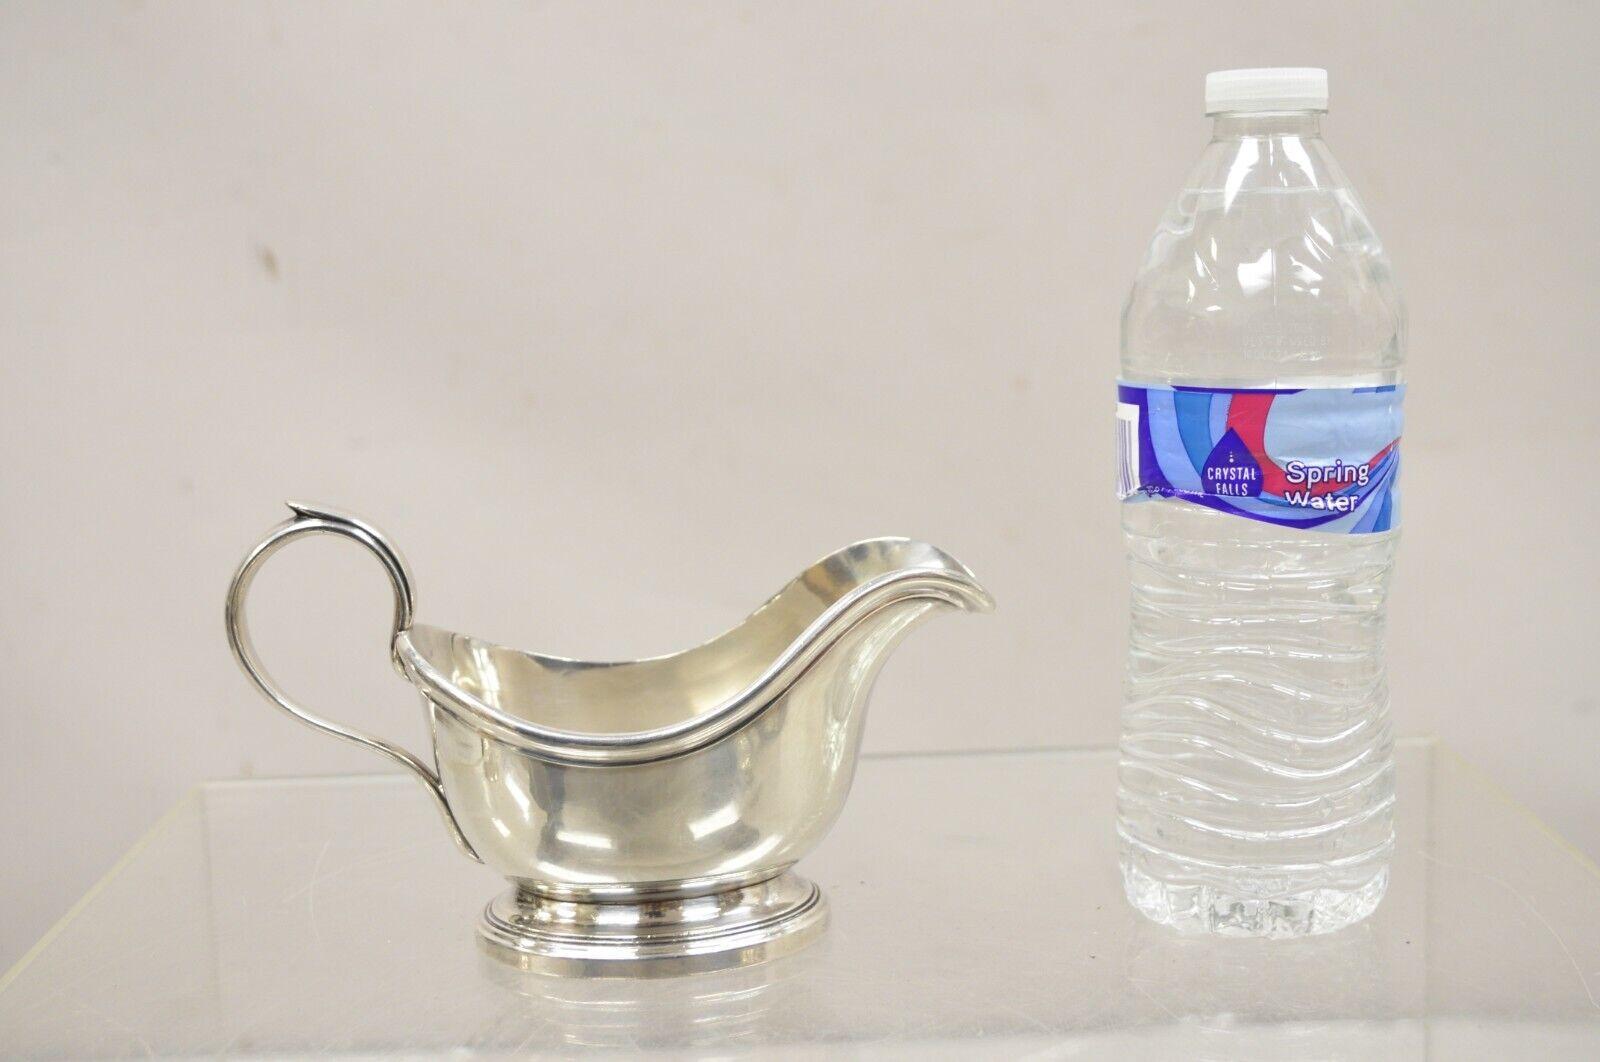 Vintage Christofle Victorian Silver Plated Small Sauce Gravy Boat with Handle. Circa  Early 20th Century. Measurements:  4.25